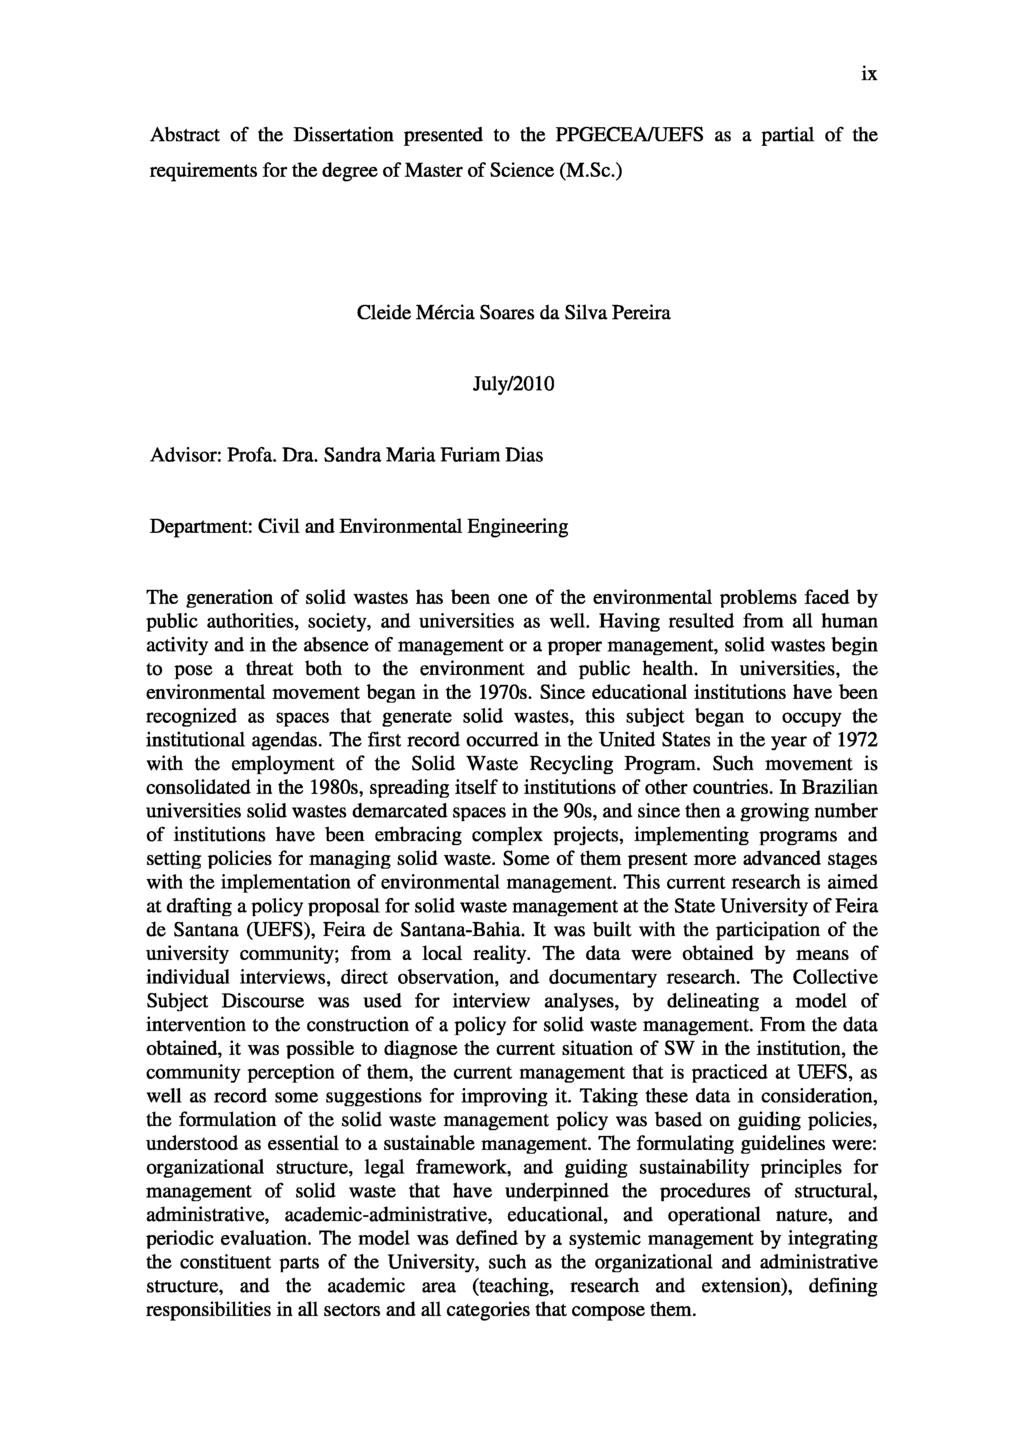 Abstract of the Dissertation presented to the PPGECEA/UEFS as a partial of the requirements for the degree of Master of Science (M.Sc.) Cleide Mércia Soares da Silva Pereira July/2010 Advisor: Profa.